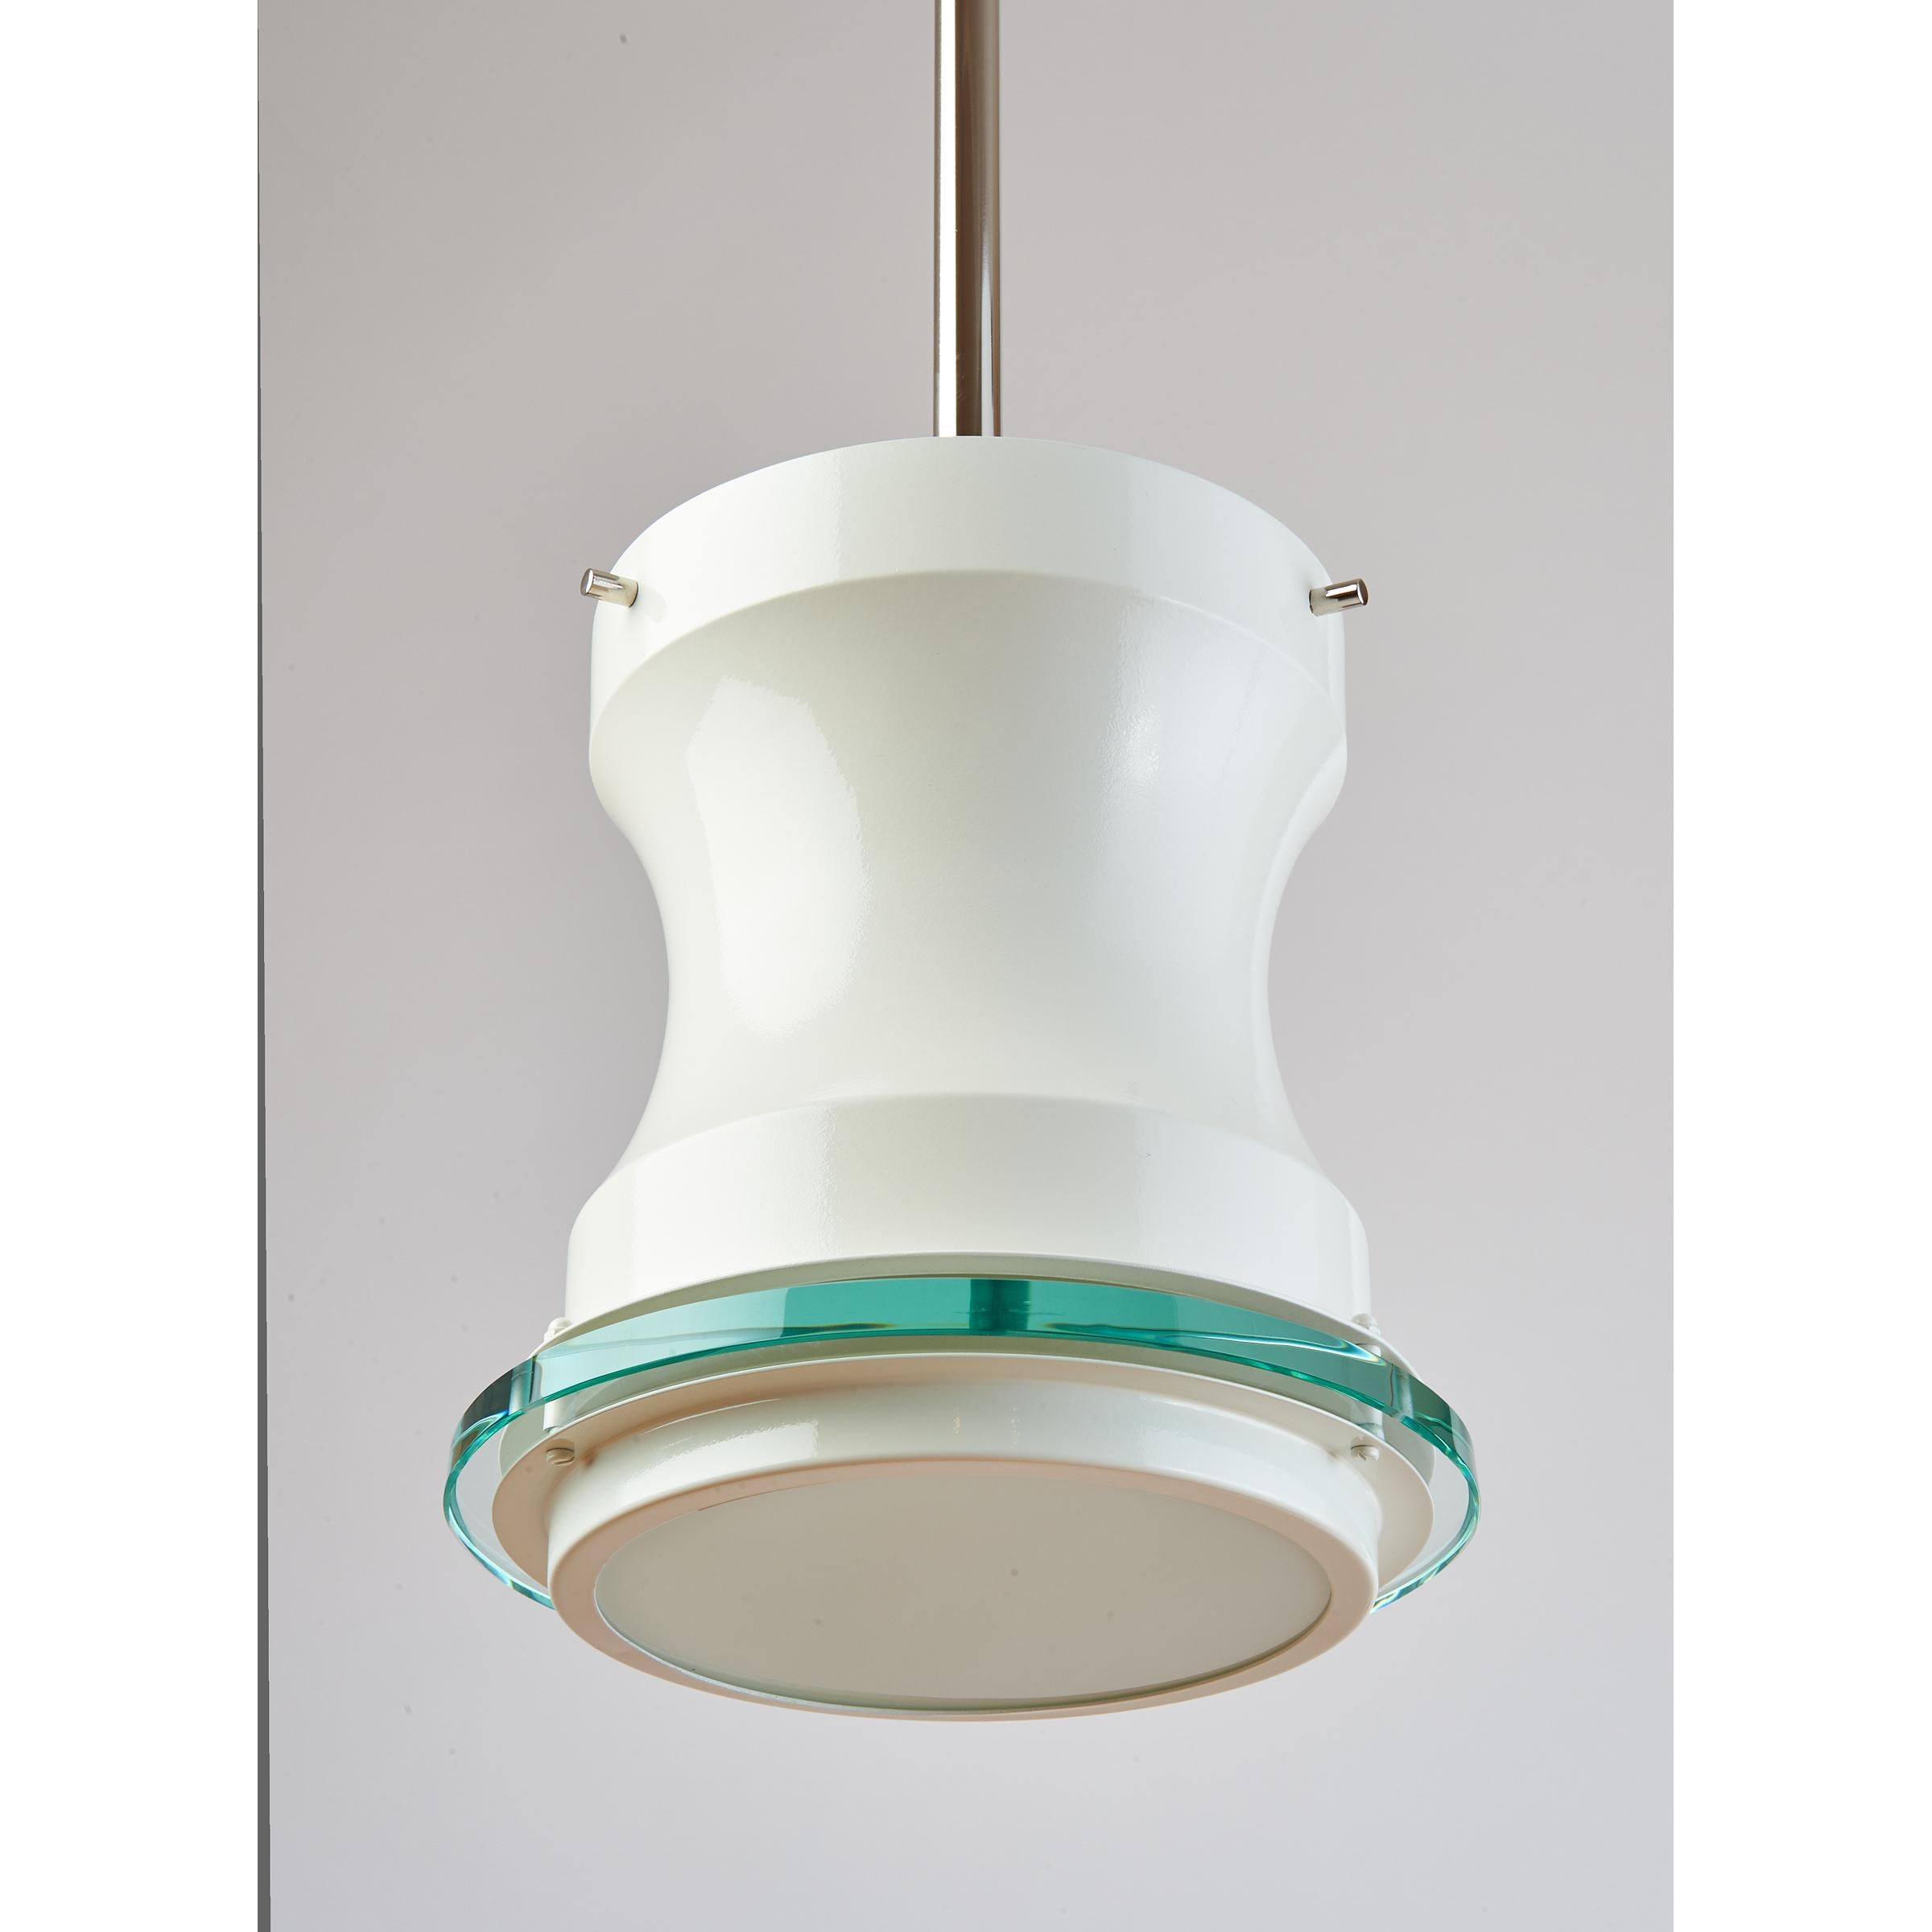 STILNOVO, 1960s
Two white enameled lanterns with clear and opaline glass diffusers, nickeled mounts. Could be mounted as ceiling lights.
Rewired for the U.S. with one standard base bulb, up to 100 W
Italy, 1960s
Measures: 8 Diameter x 40 H